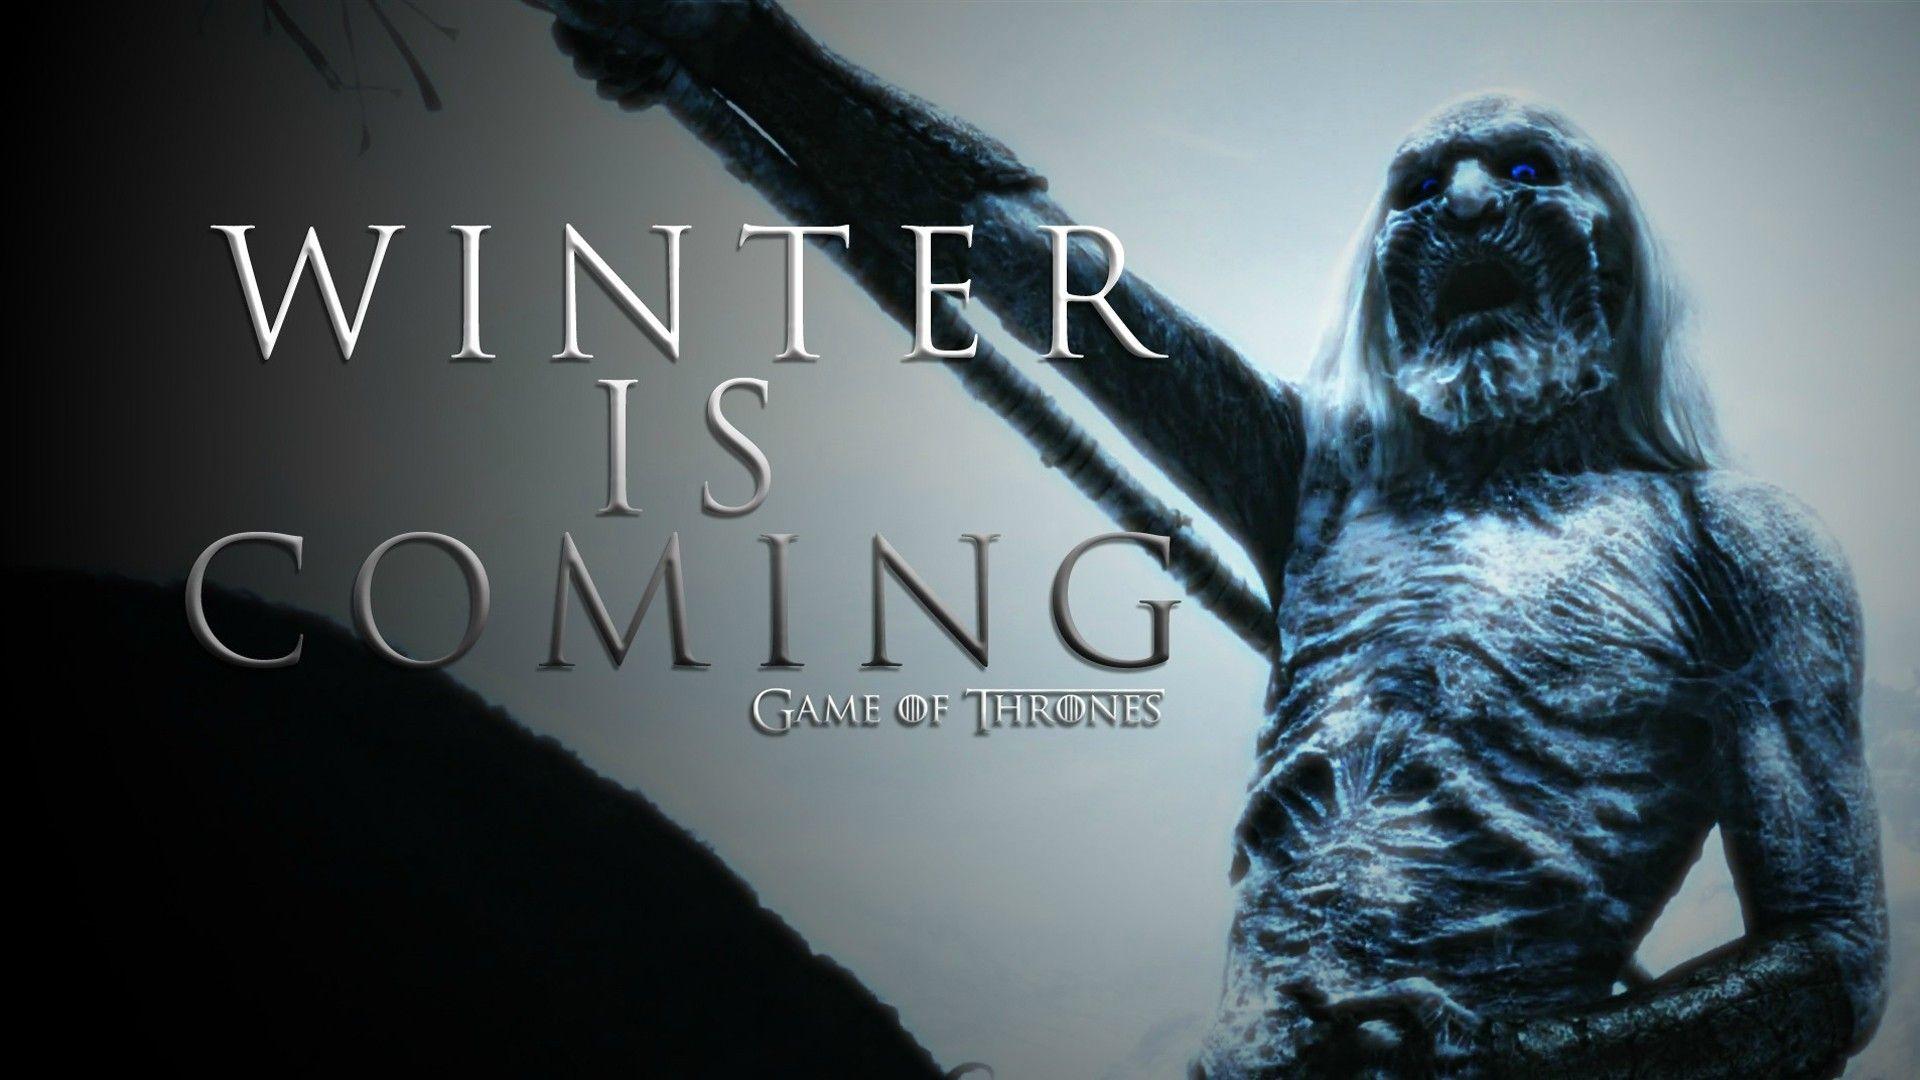 Game Of Thrones, Winter Is Coming, White Walkers Wallpaper HD